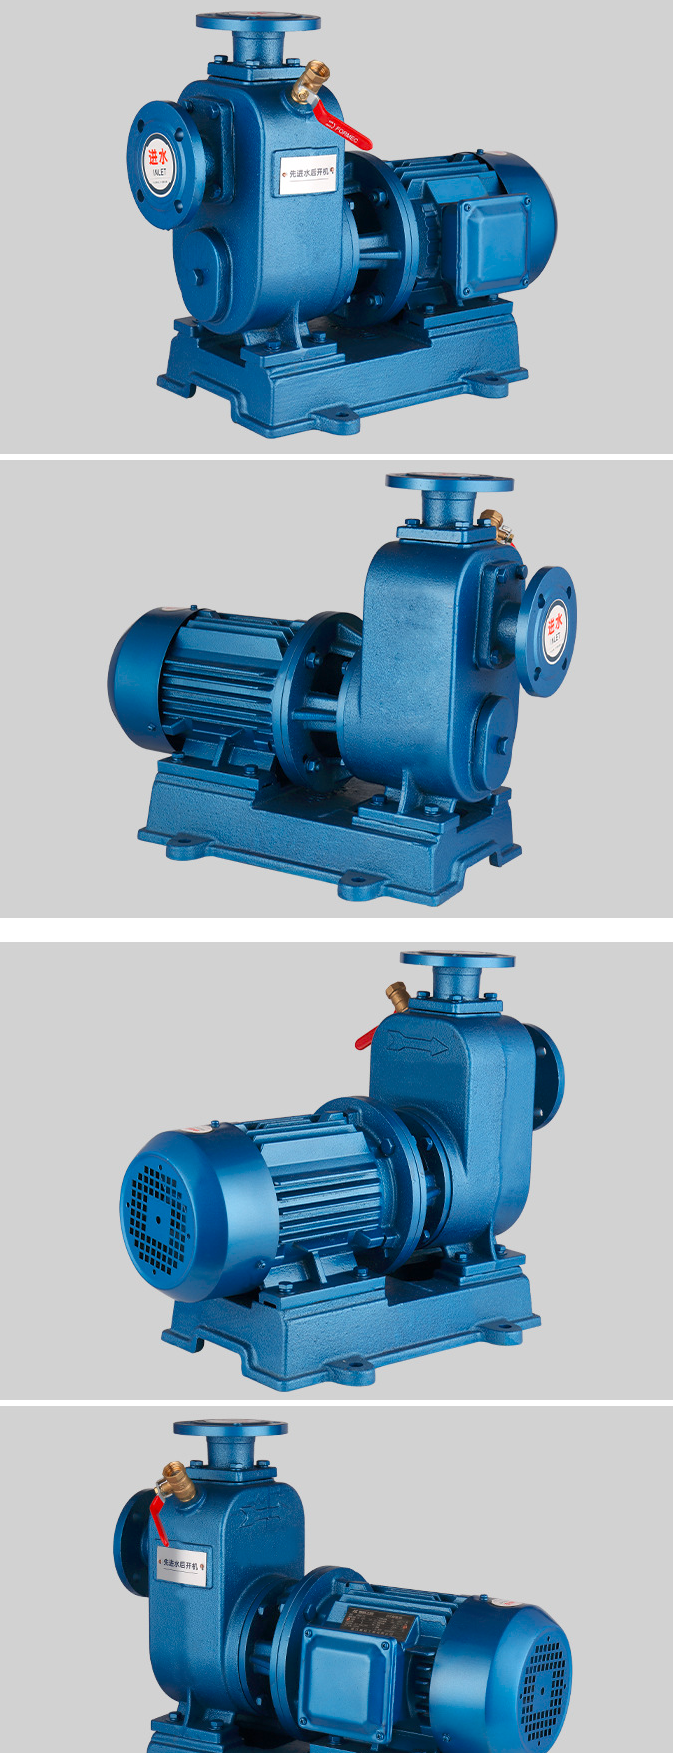 Large Flow Small Volume Dirty Water Pump ZW Series Low Power Consumption